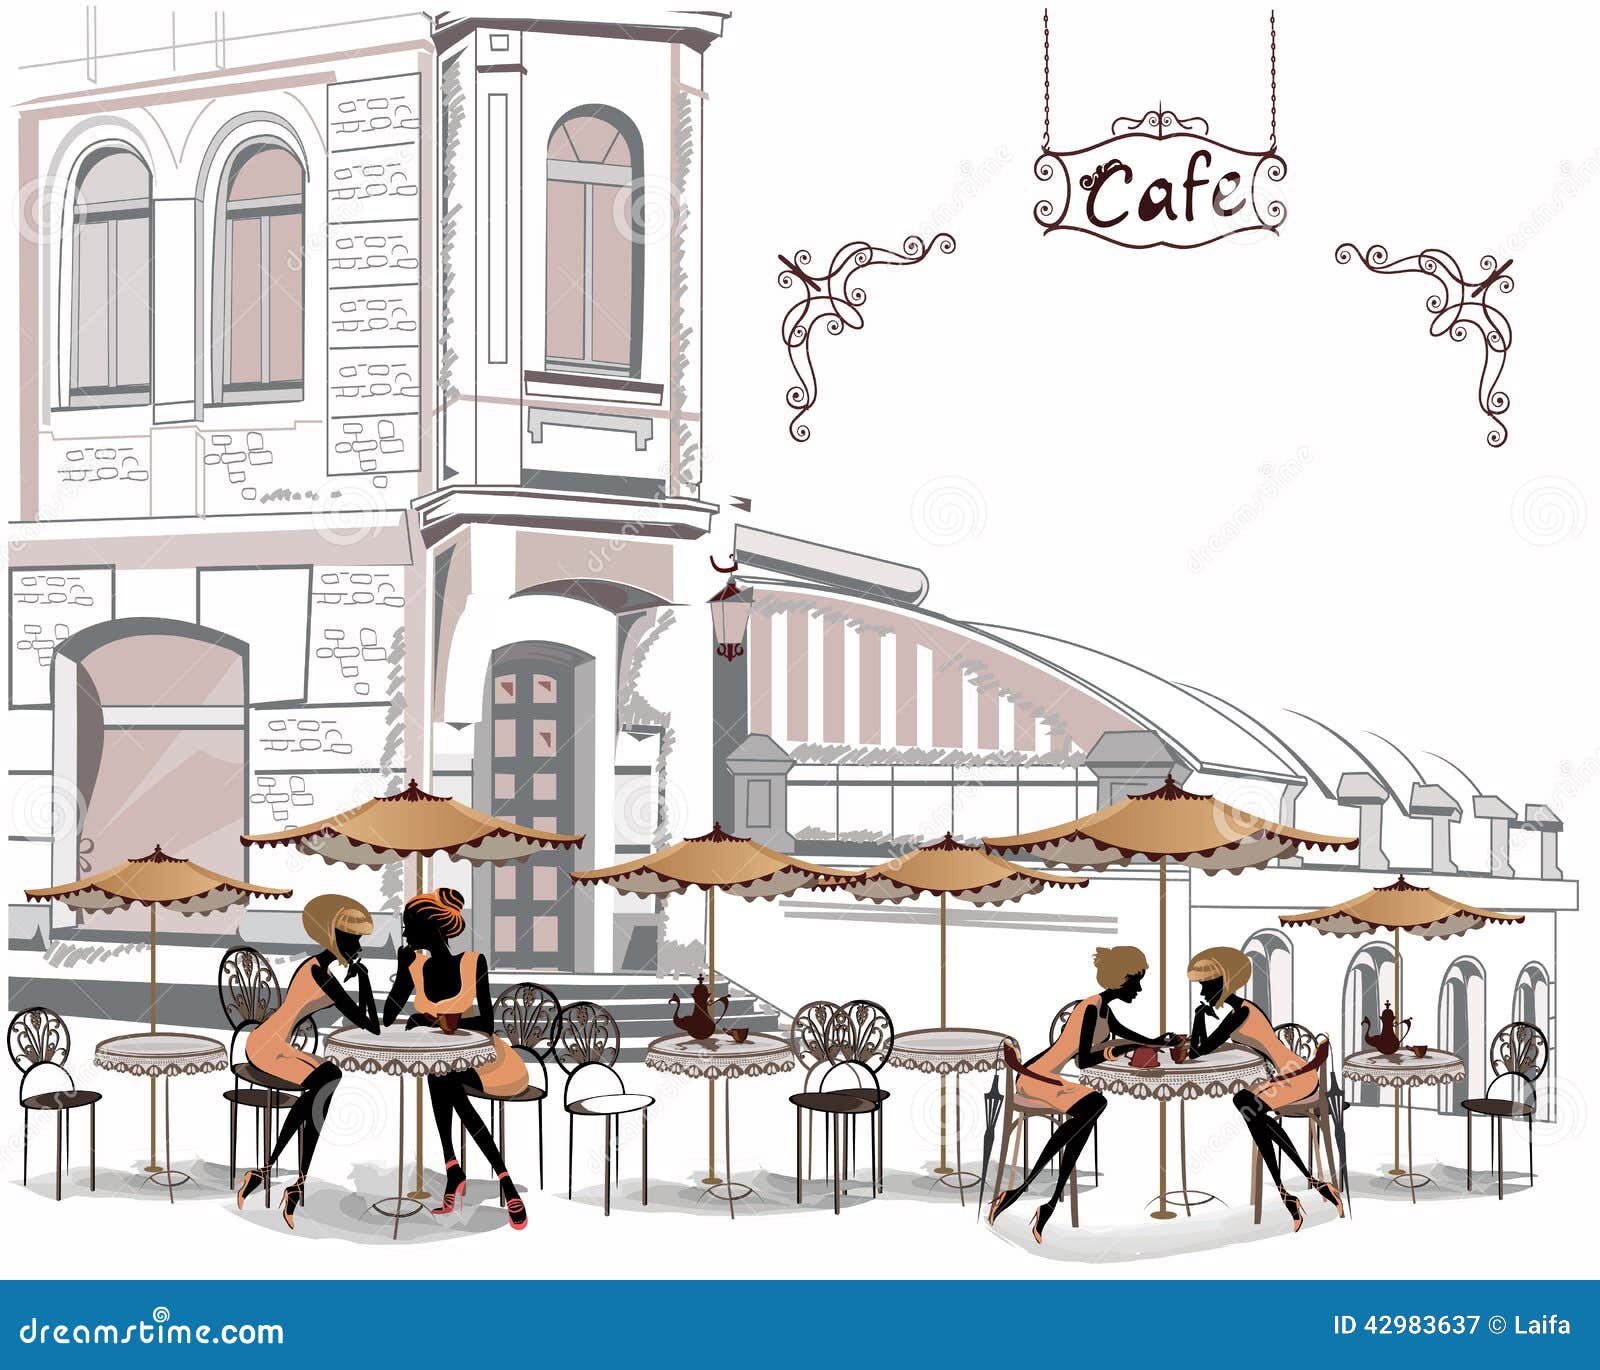 series of street cafes in the city with people drinking coffee